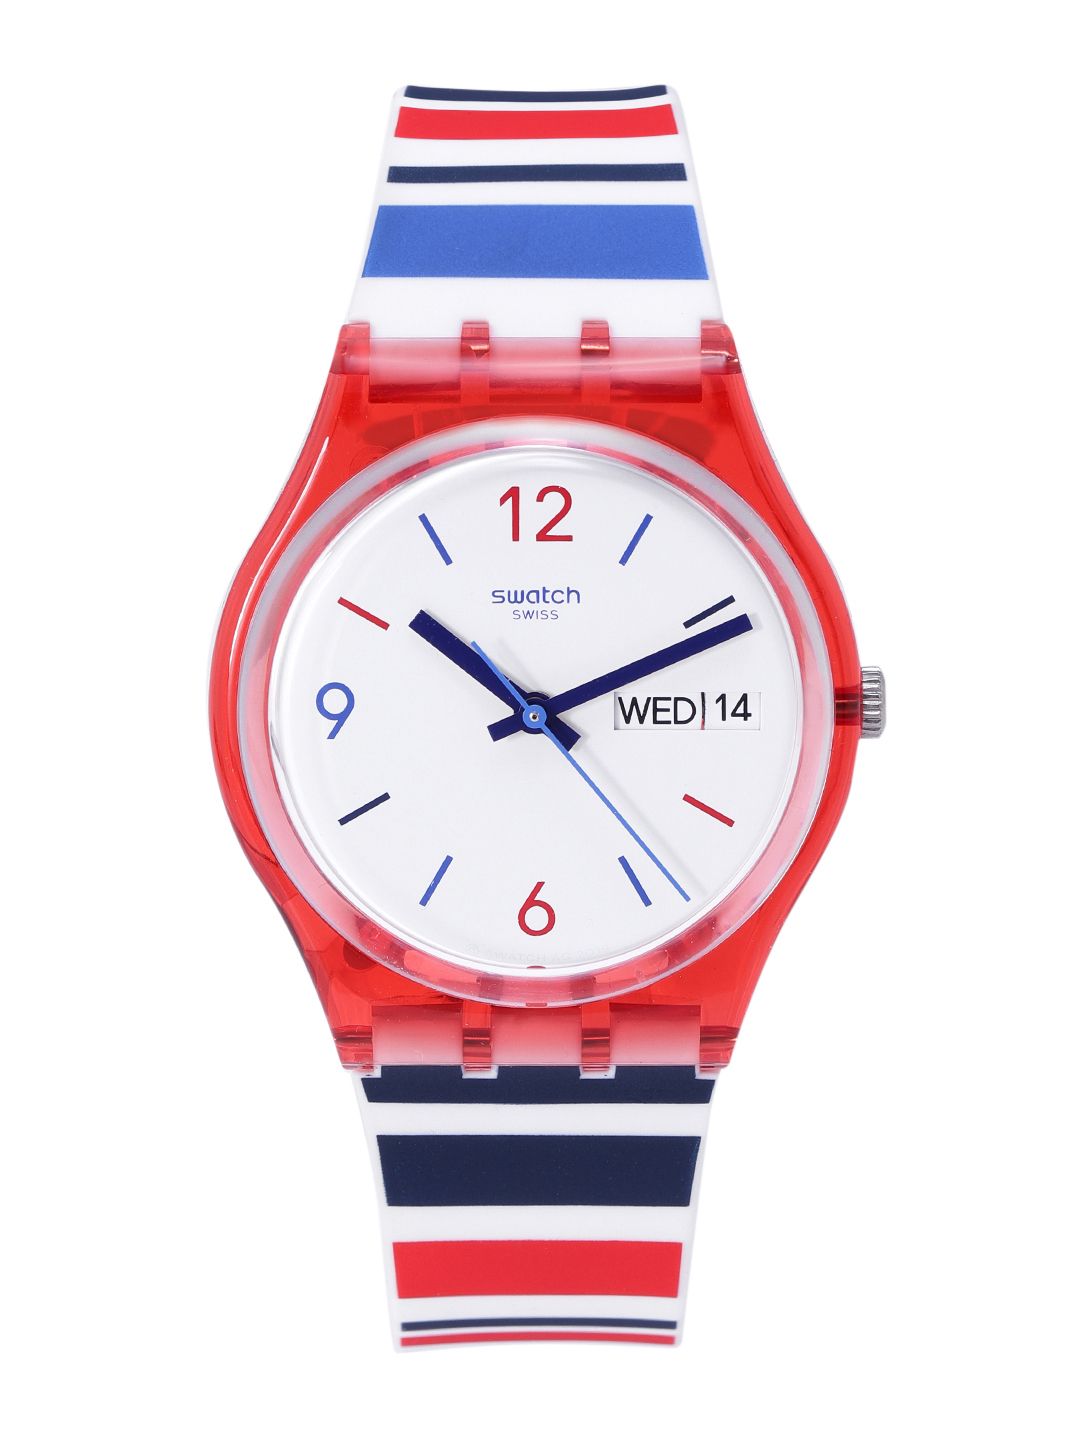 Swatch Unisex White Water Resistant Analogue Swiss Made Watch GR712 Price in India